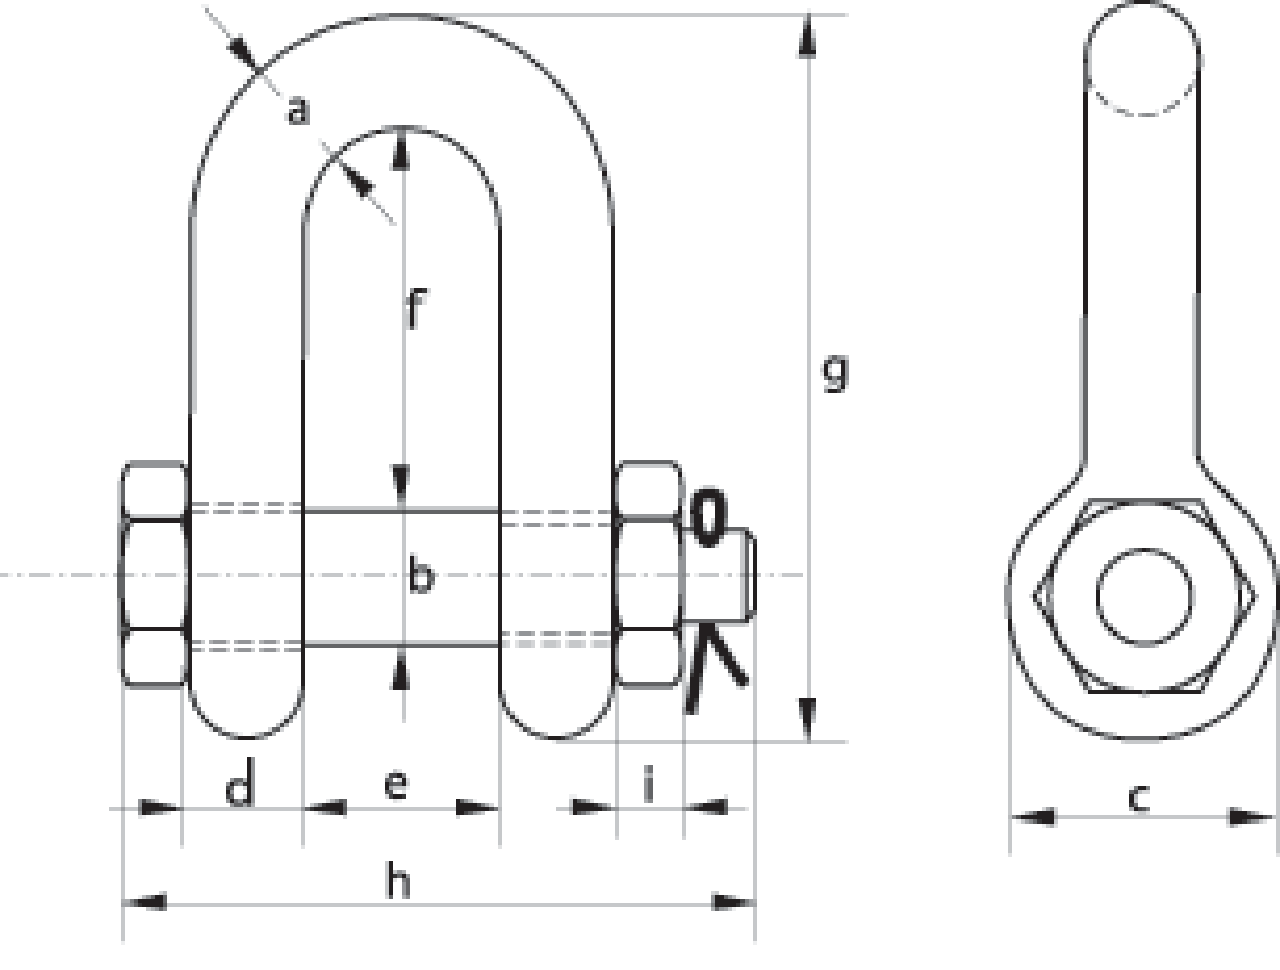 Dee Shackles with Safety Bolt G-4153 drawing